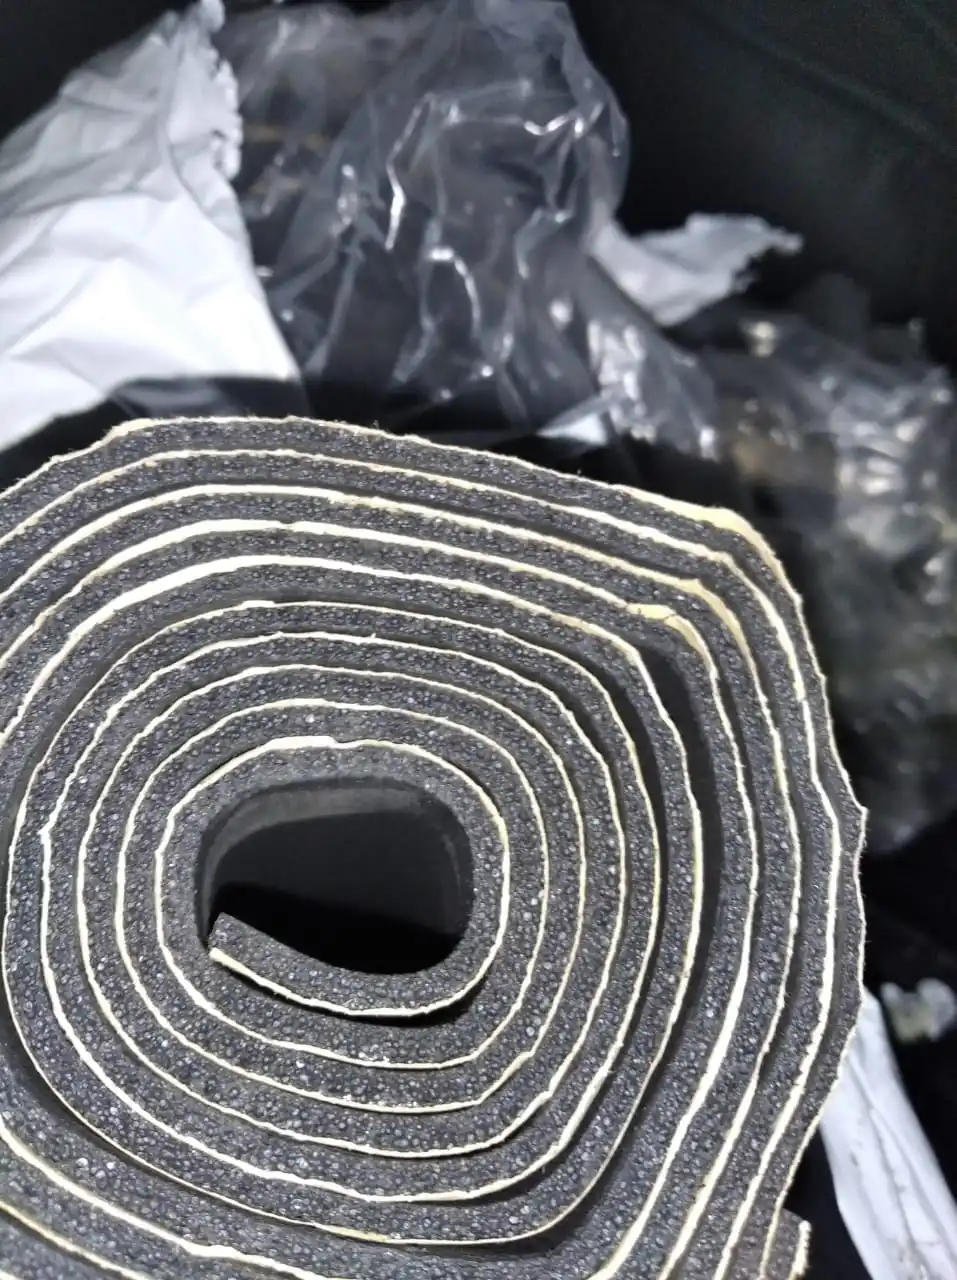 200cmx50cm 5mm-30mm Car Sound Proofing Deadening Car Truck Anti-noise Sound  Insulation Cotton Heat Closed Cell Foam - Price history & Review, AliExpress Seller - Excellent Auto Accessories Store